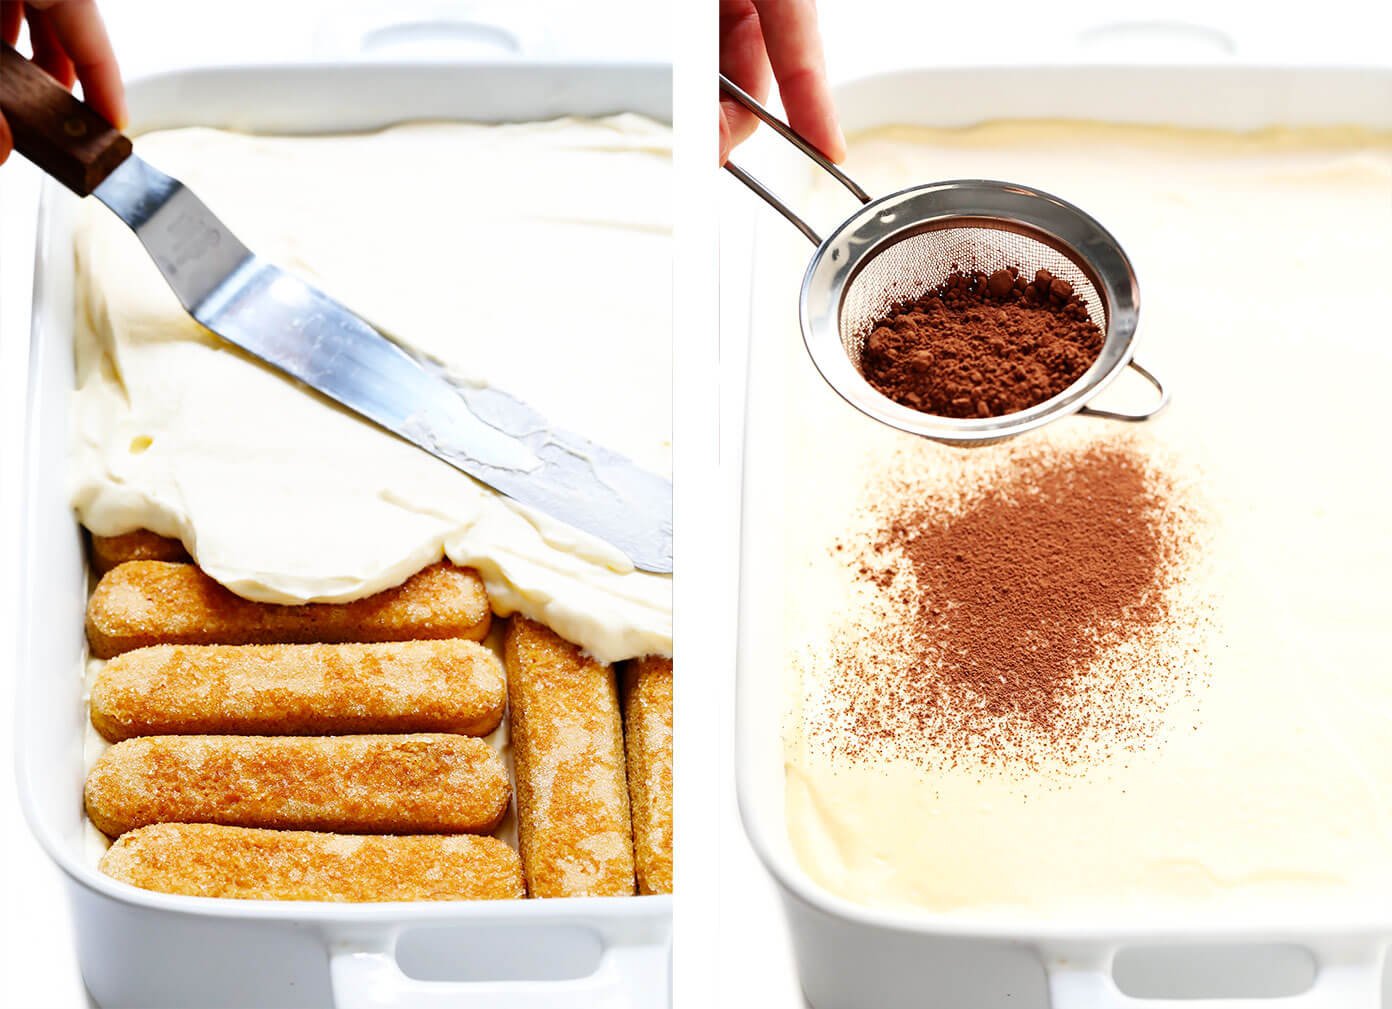 Spreading mascarpone filling on top of ladyfingers and dusting the tiramisu with cocoa powder